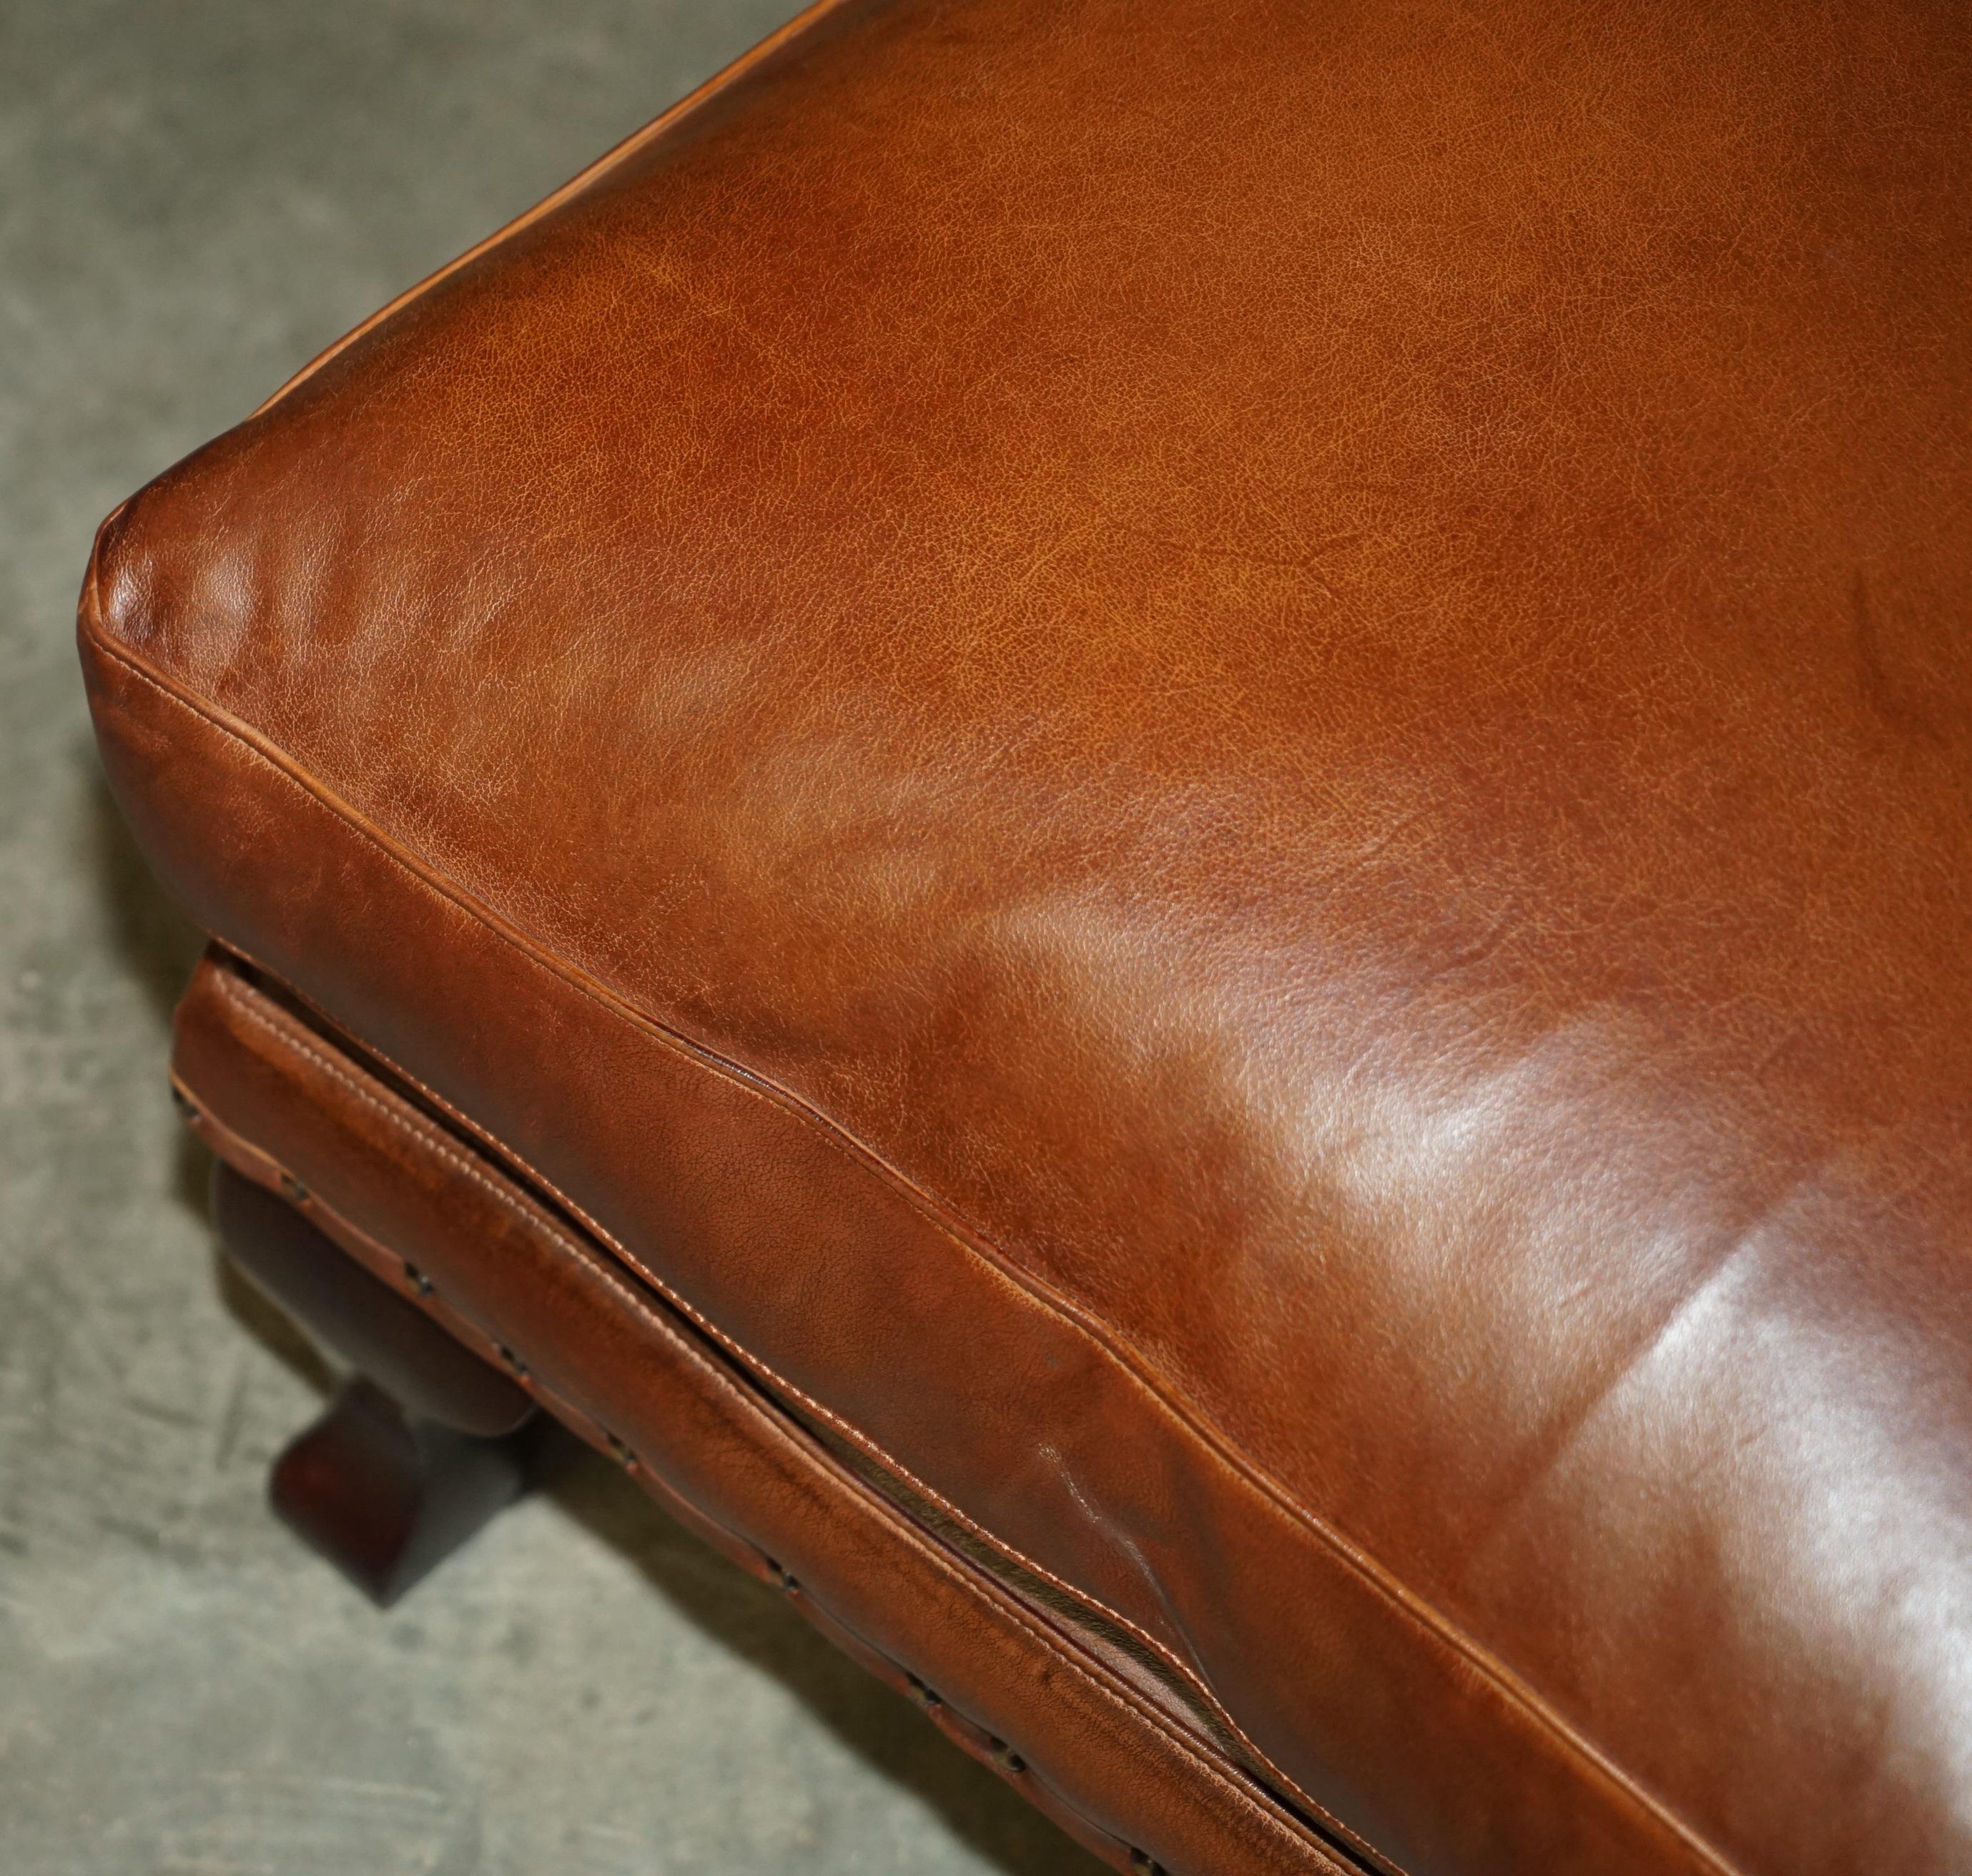 TETRAD BROWN LEATHER LARGE FOOTSTOOL LARGE ENoUGH FOR TWO PEOPLE TO SHARE (Handgefertigt) im Angebot